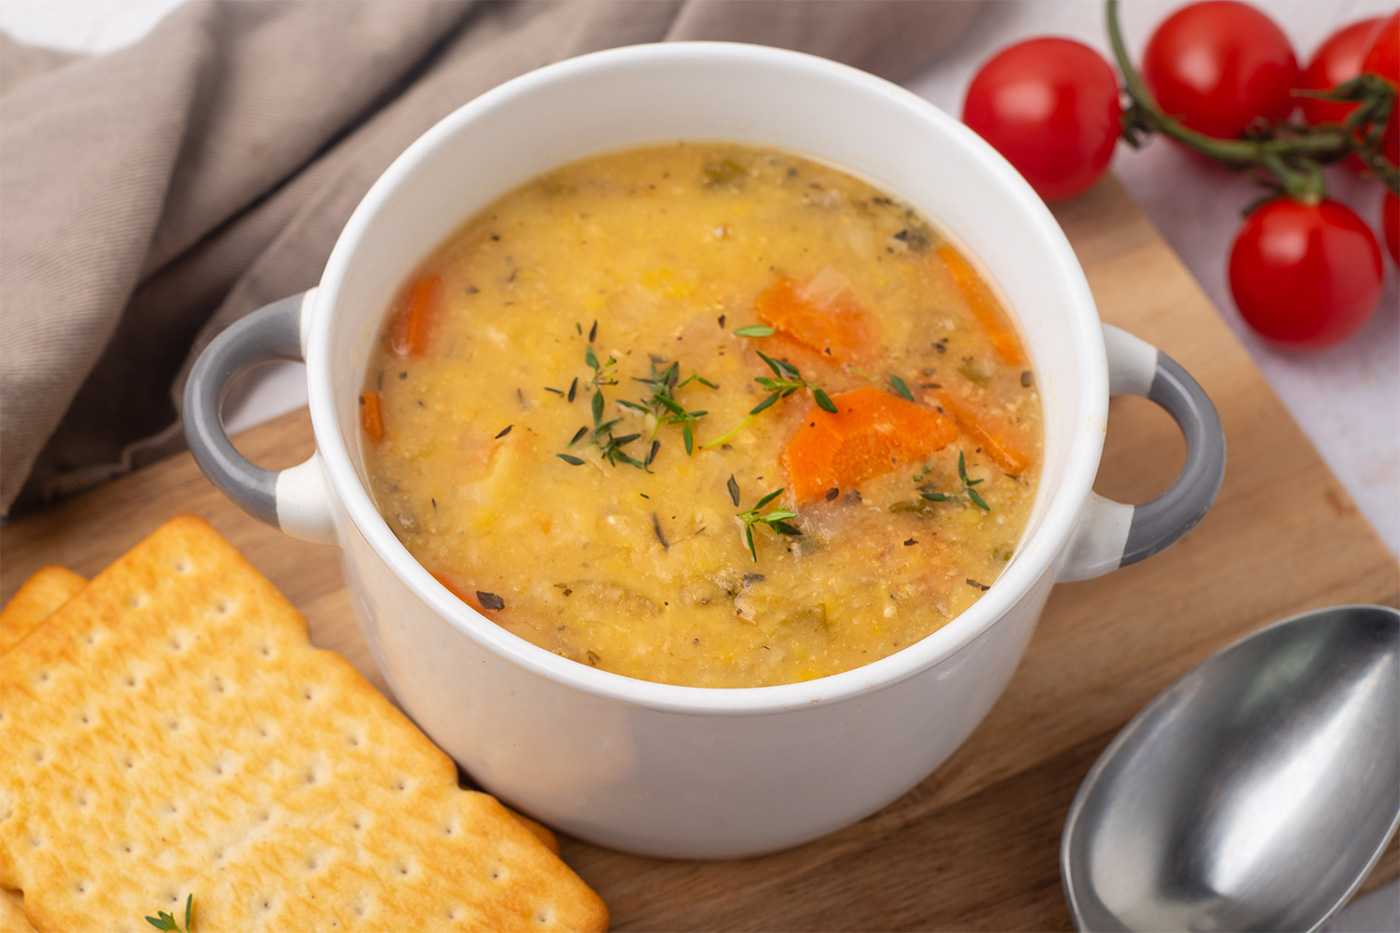 Yellow split pea soup filled with carrot cubes and spices with crackers on side